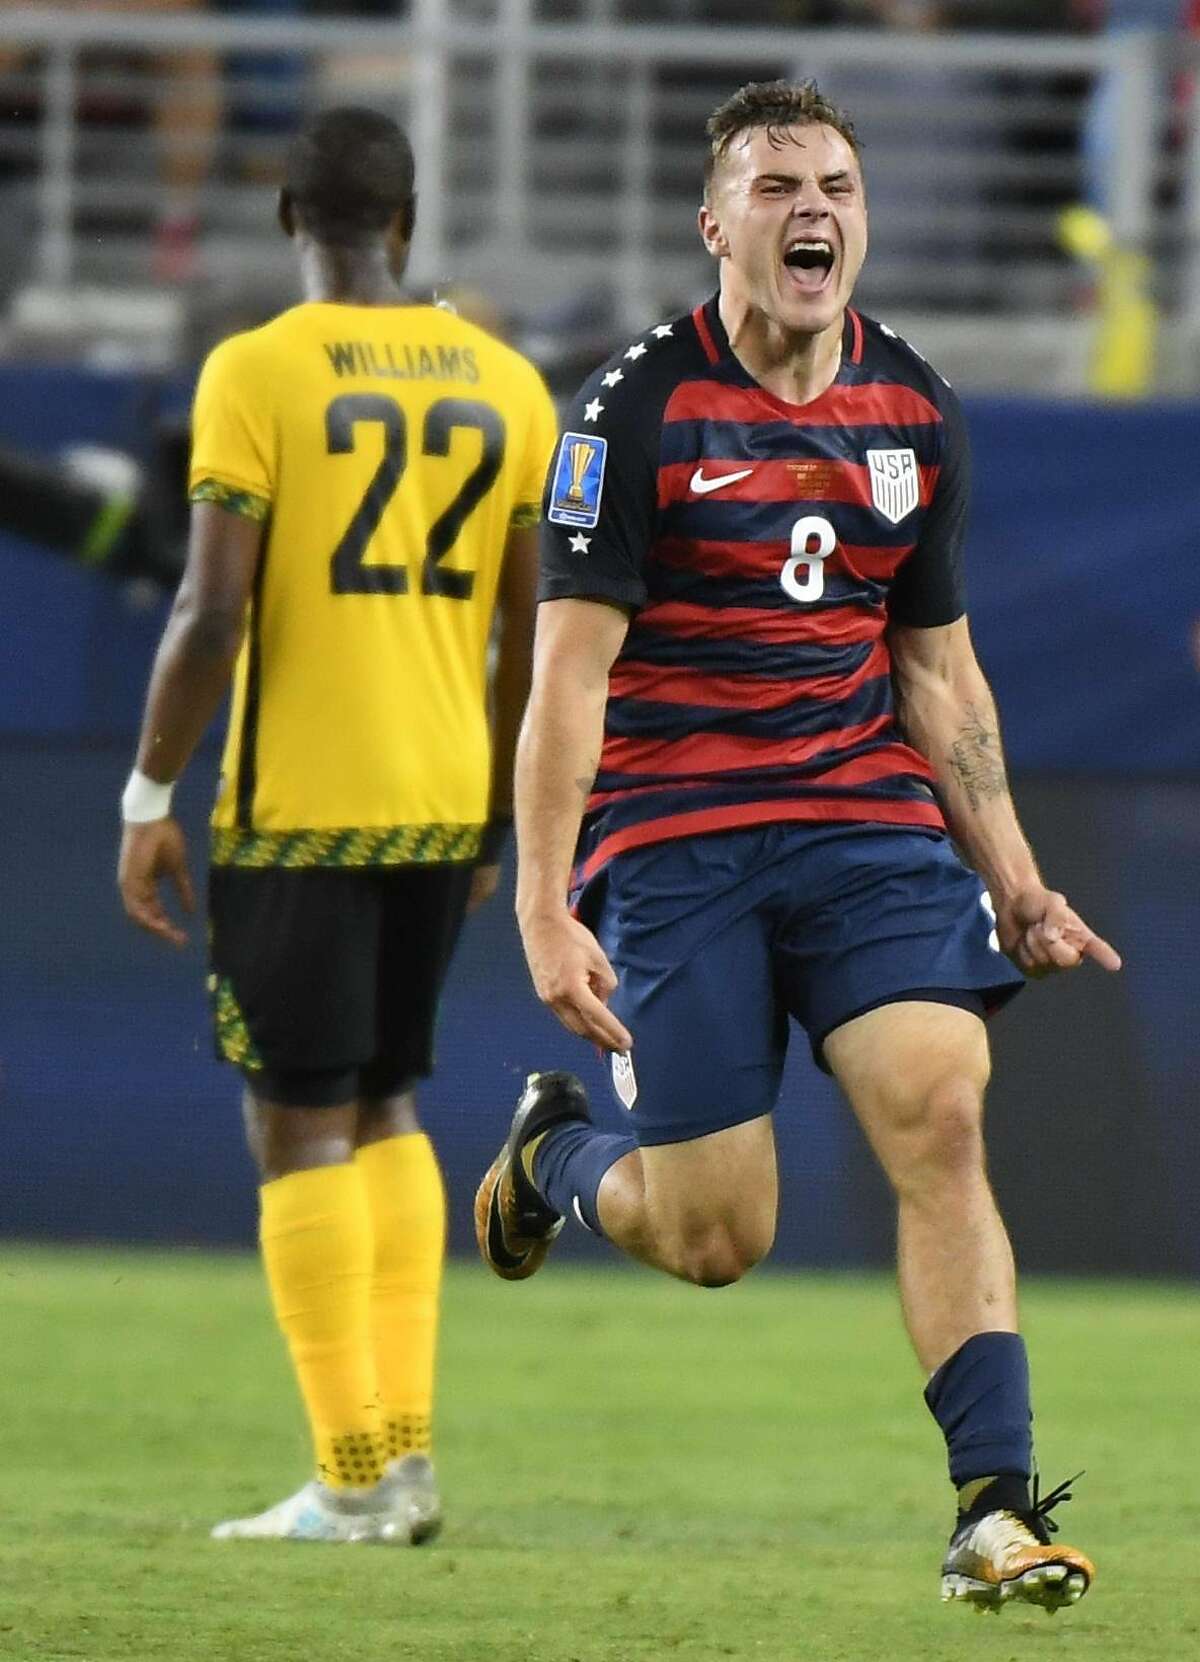 Jordan Morris of the USA celebrates scoring a goal against Jamaica during the final football game of the 2017 CONCACAF Gold Cup at the Levi's Stadium in Santa Clara, California on July 26, 2017. / AFP PHOTO / Mark RALSTONMARK RALSTON/AFP/Getty Images